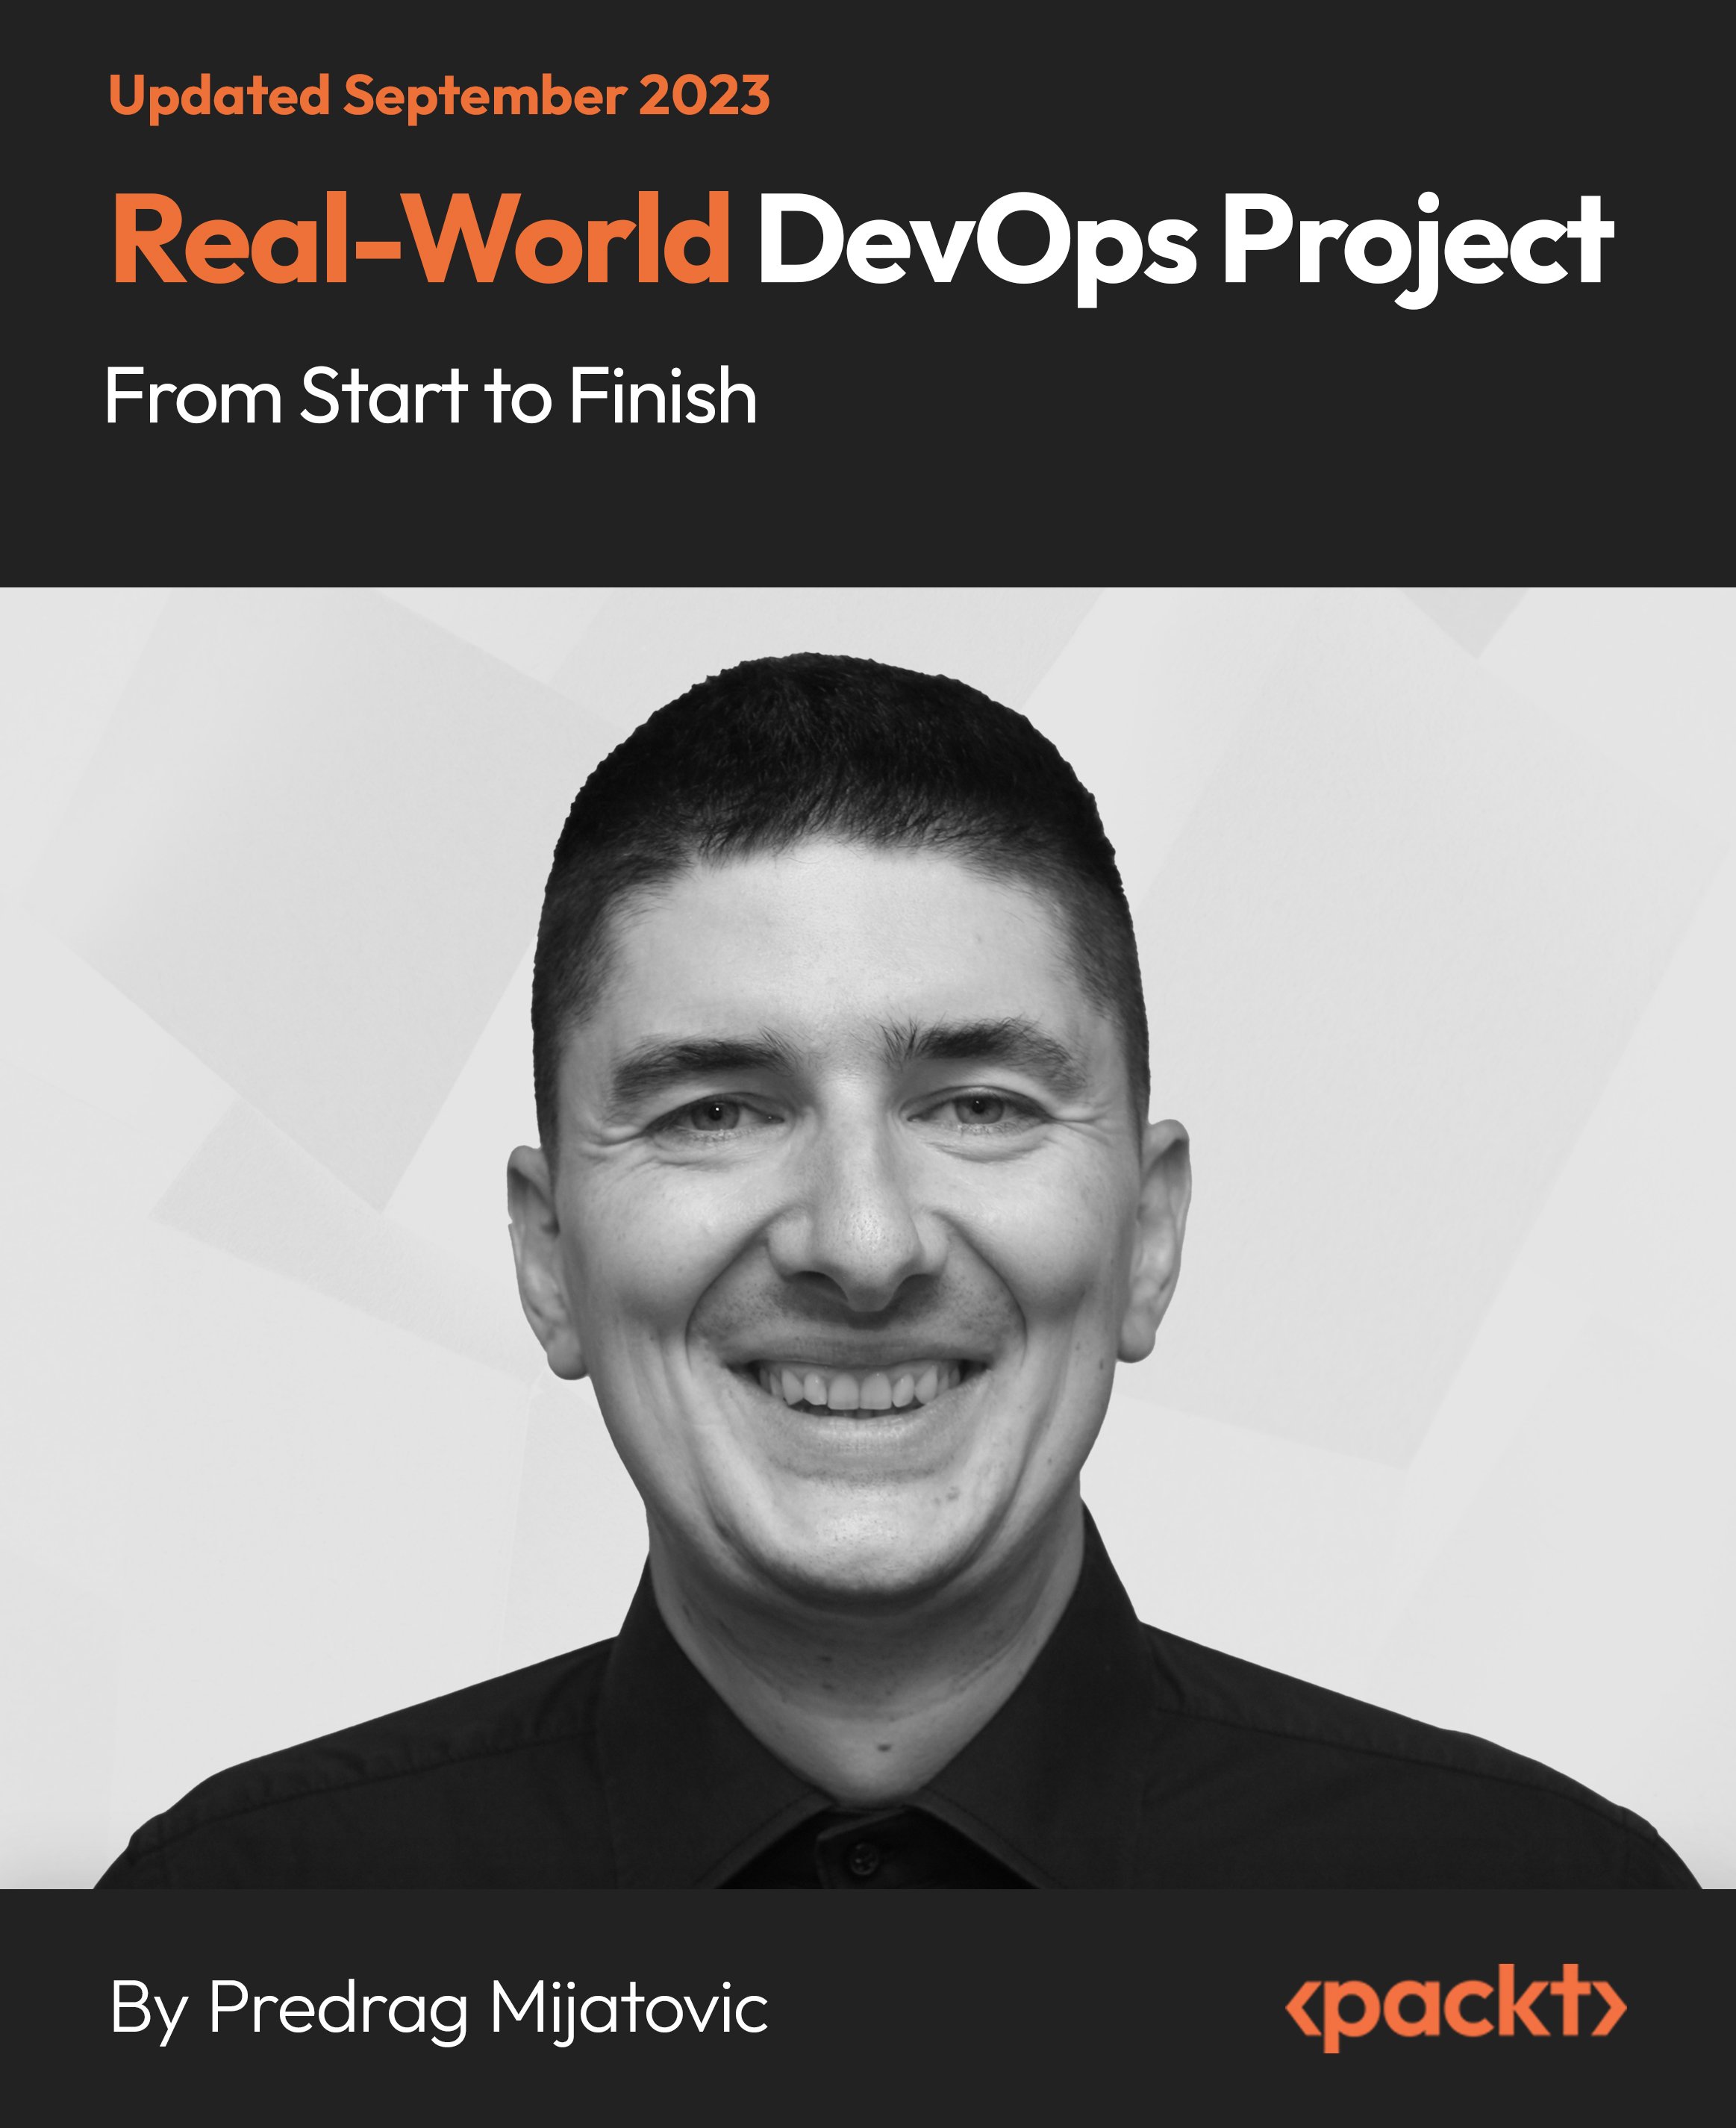 Real-World DevOps Project From Start to Finish